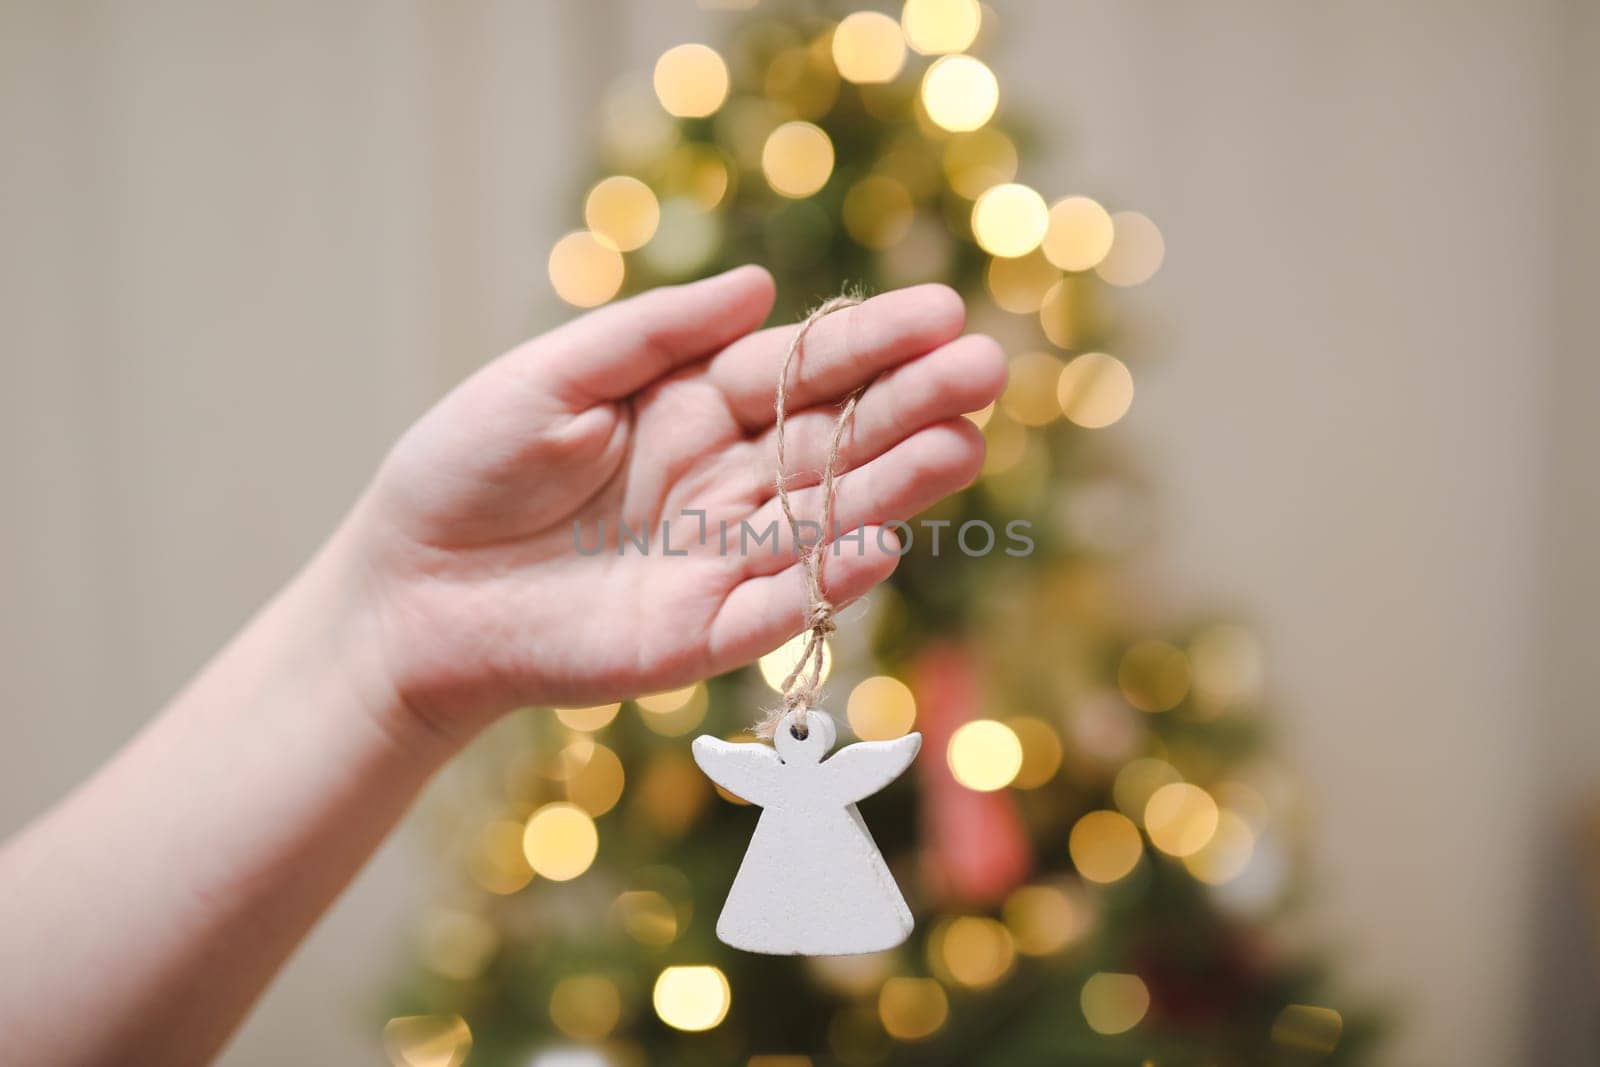 Decorating Christmas tree, hand holding Christmas toy. Holiday, Christmas and New Year celebration concept by paralisart